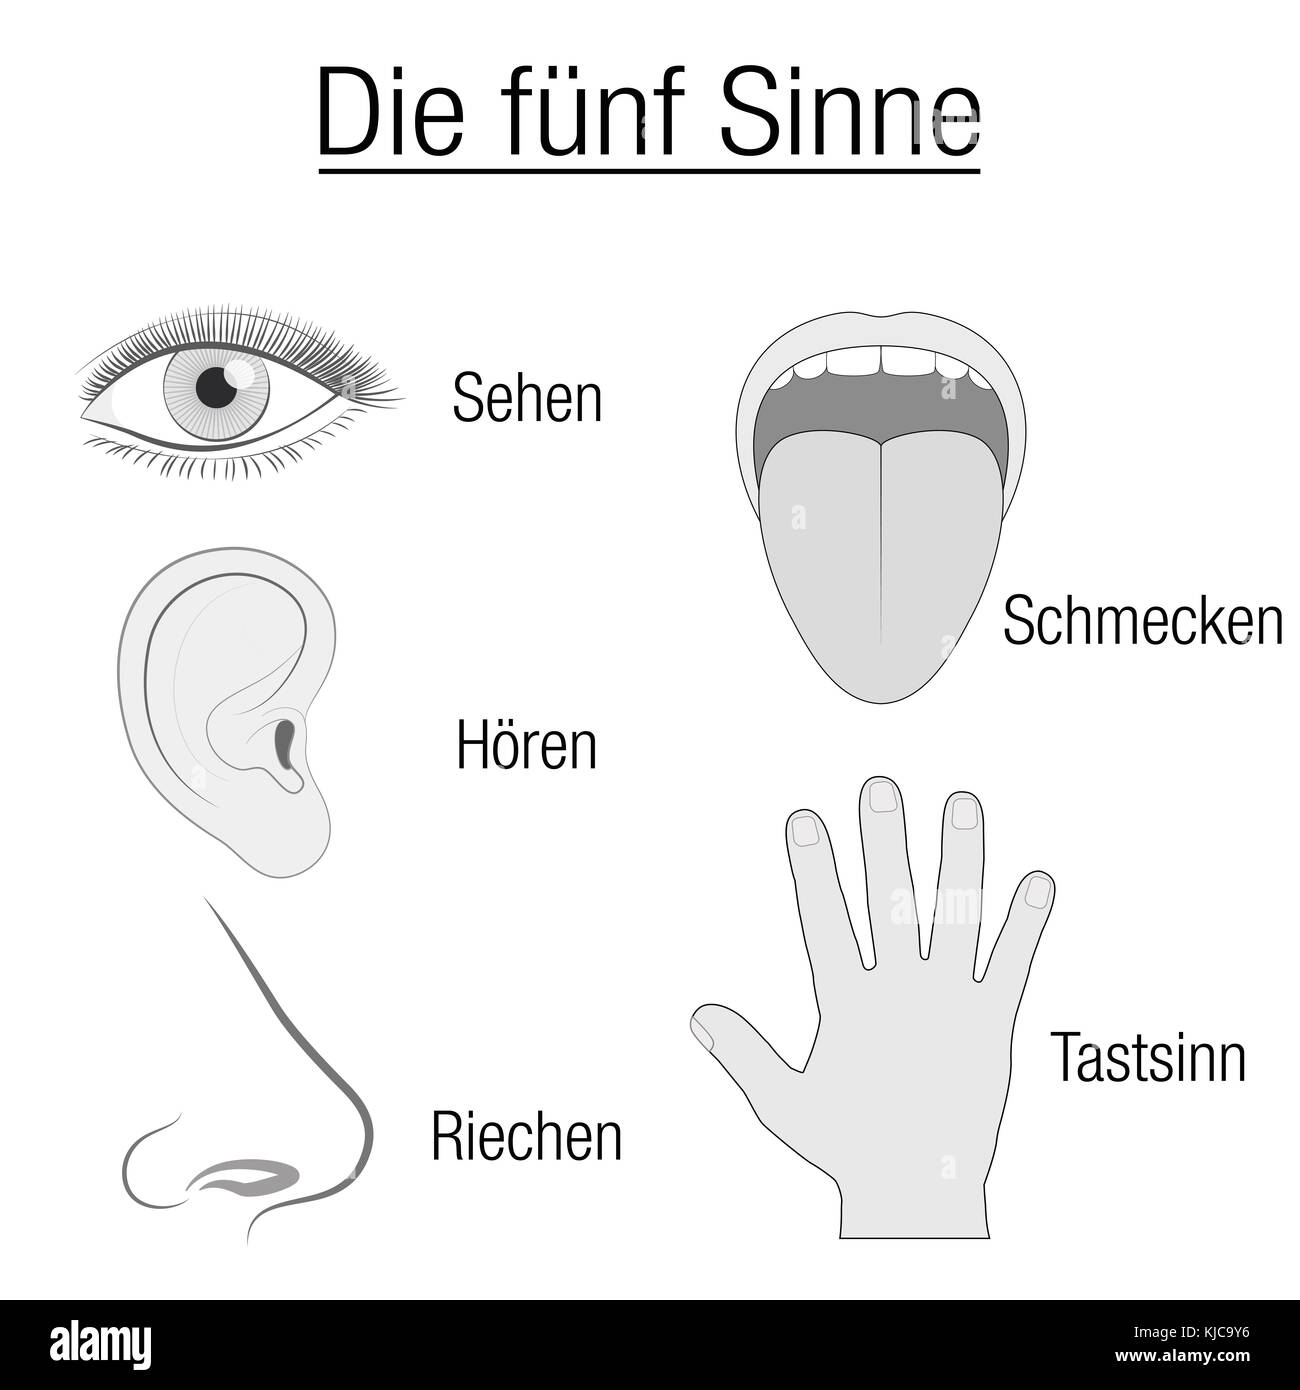 Five senses chart - sensory organs eye, ear, tongue, nose and hand and appropriate designation sight, hearing, taste, smell and touch, GERMAN LANGUAGE Stock Photo